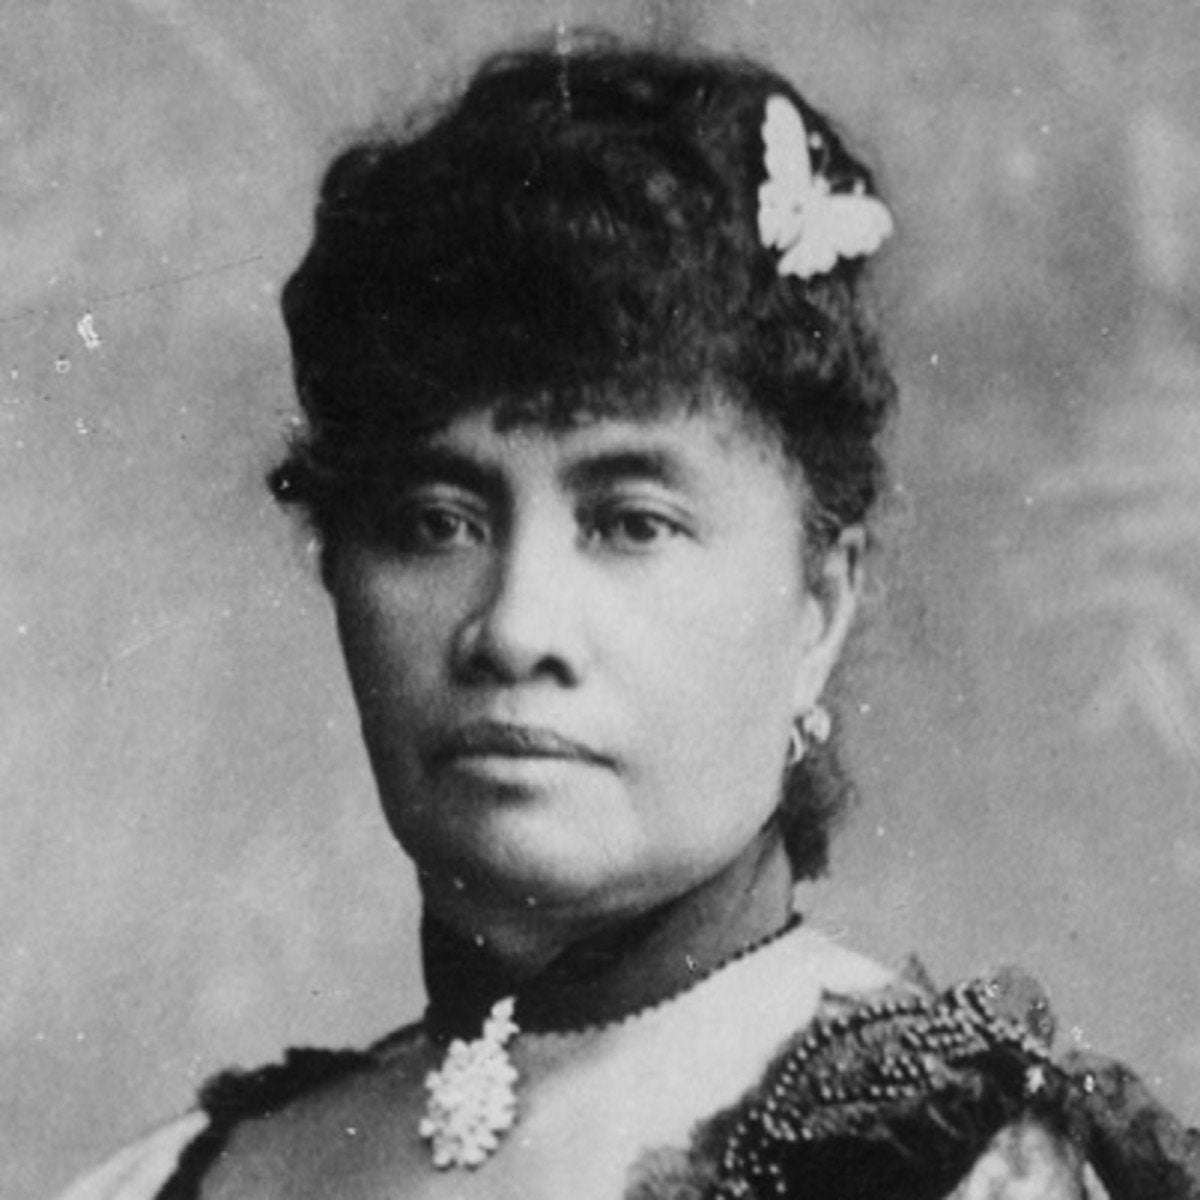 image for TIL that Hawaii's first queen's first time running the country was marked by a smallpox outbreak and that the decisive action she took to stop the spread (closing all ports) drew the ire of rich sugarcane plantation owners and eventually lead to the coup that overthrew her.